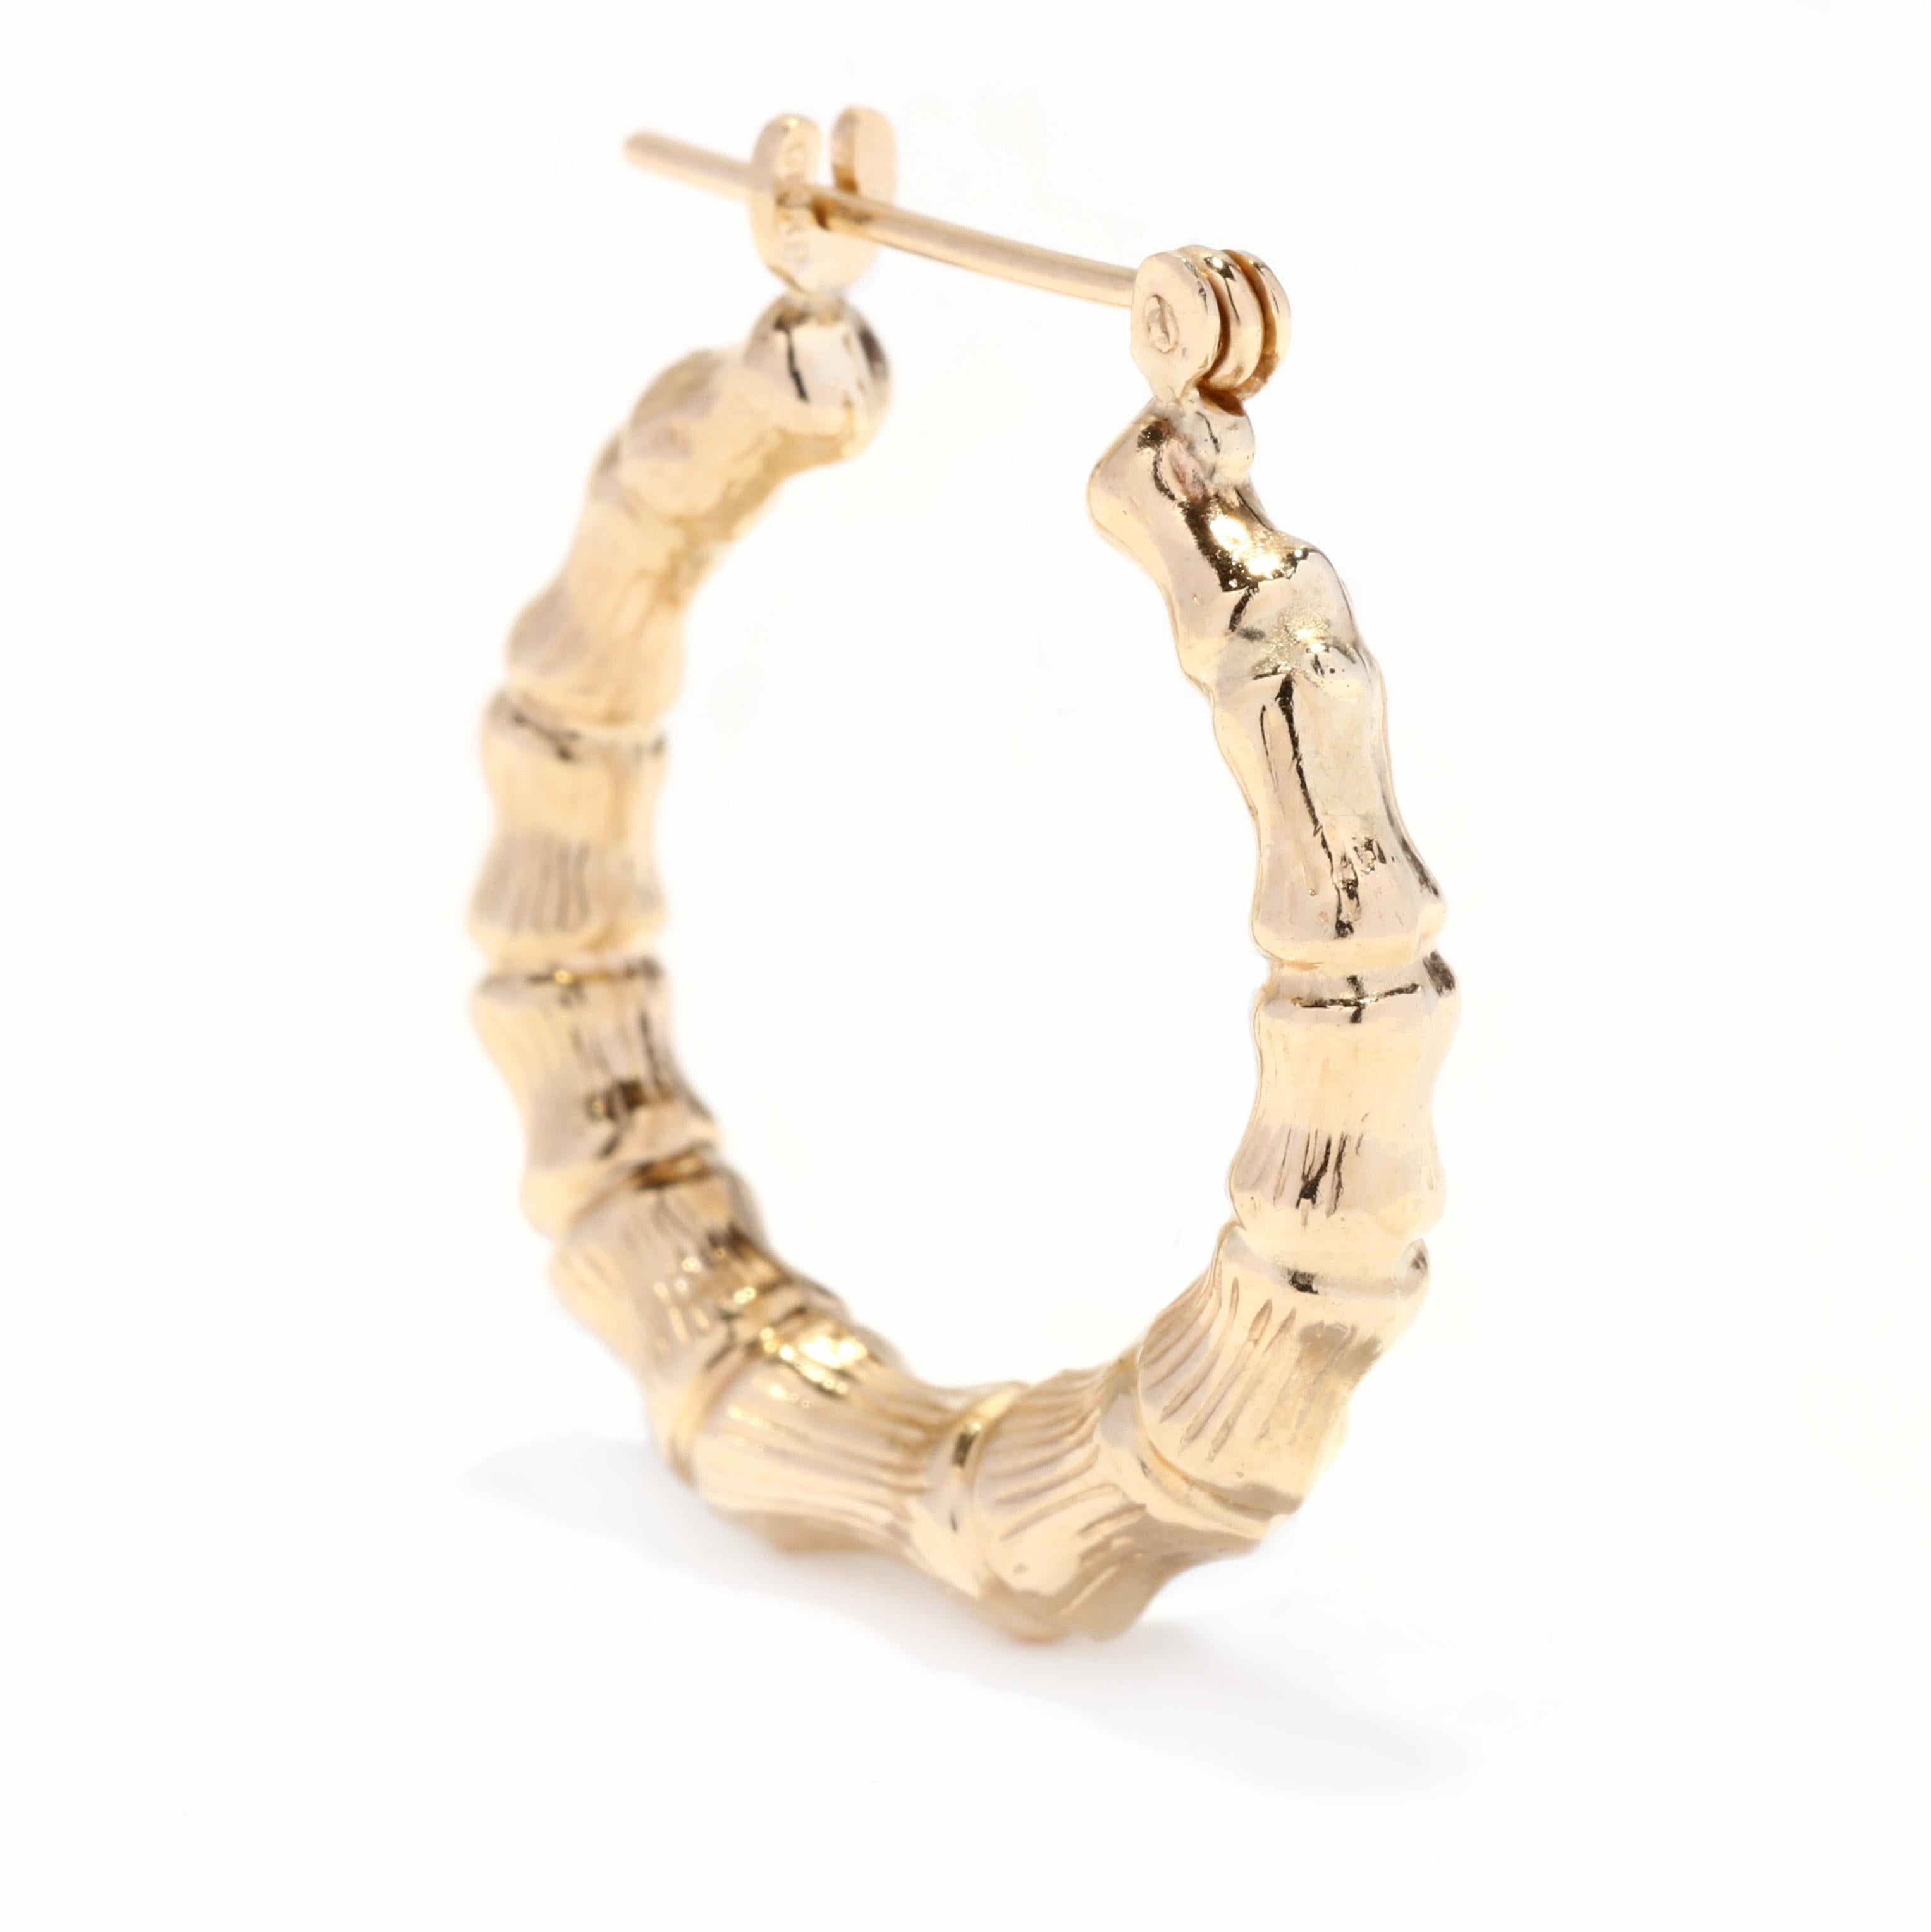 A pair of vintage 14 karat yellow gold bamboo hoop earrings. These earrings features a tapered circular design in a textured bamboo motif with latch back closures.

Length: 7/8 in.

Tube Width: 4.4 mm

Weight: 1.5 dwts



Ring Sizings &